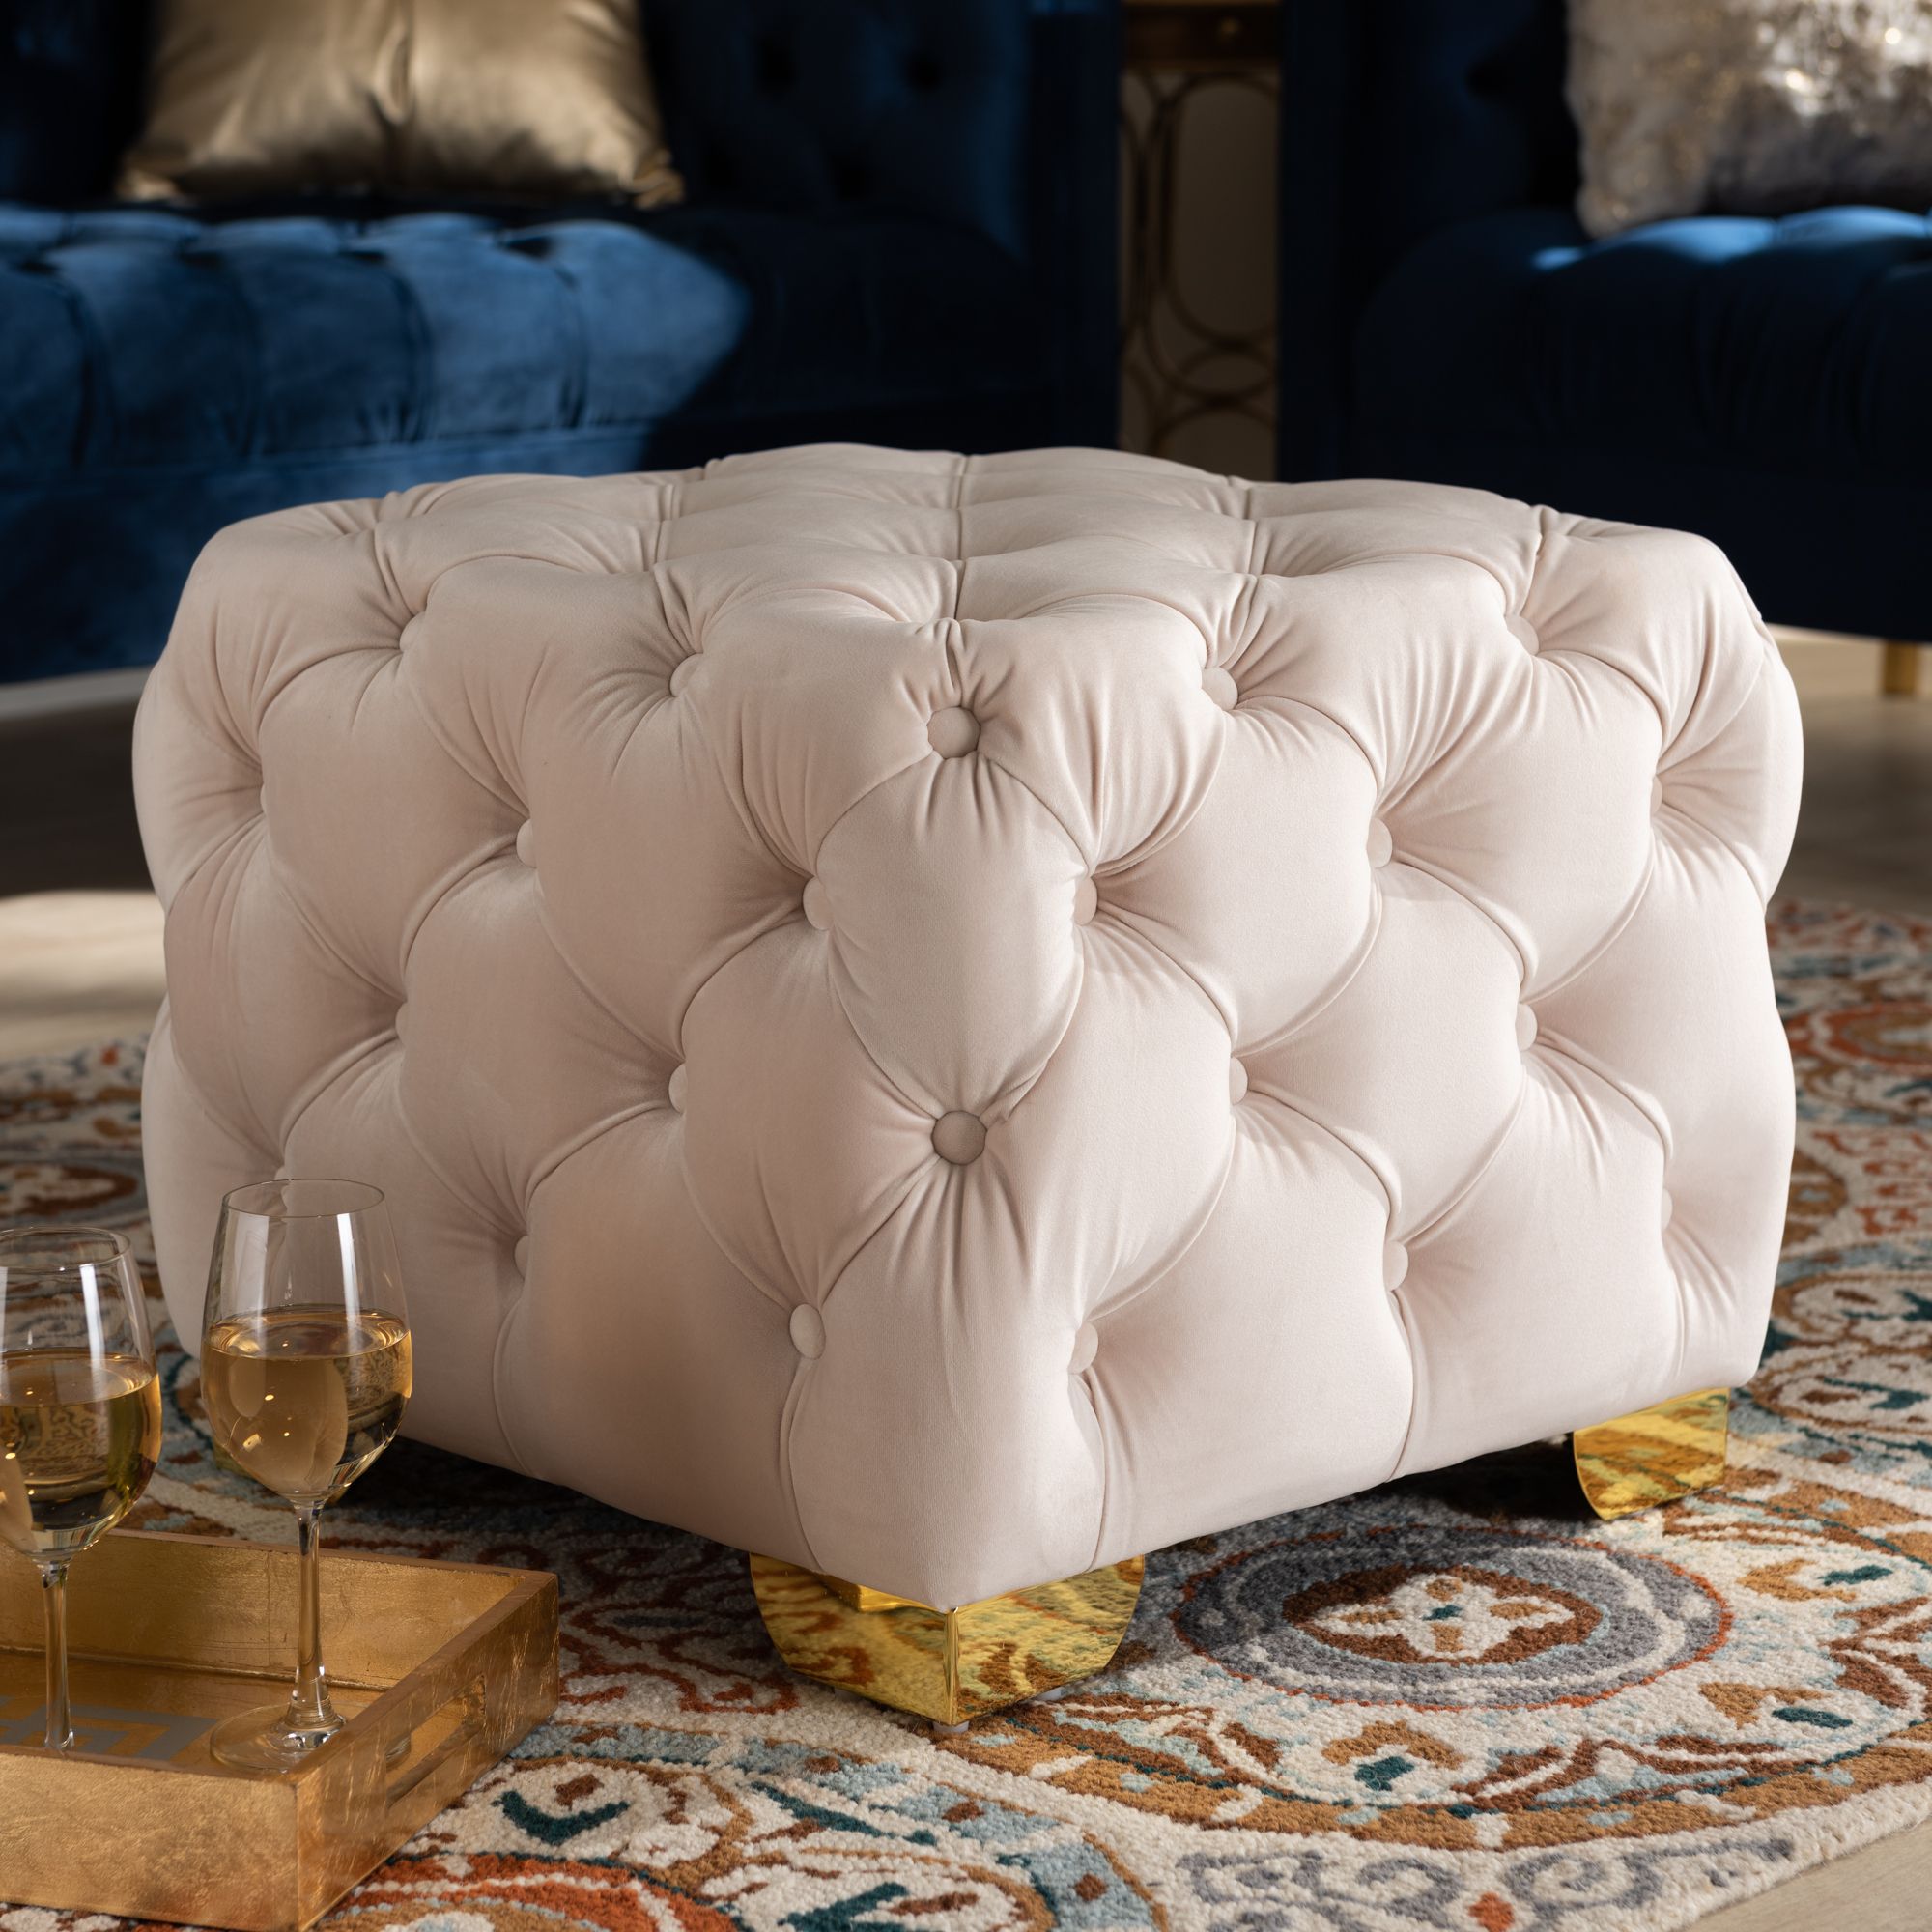 Most Recently Released Cream Fabric Tufted Oval Ottomans Regarding Baxton Studio Avara Glam And Luxe Light Beige Velvet Fabric Upholstered (View 4 of 10)